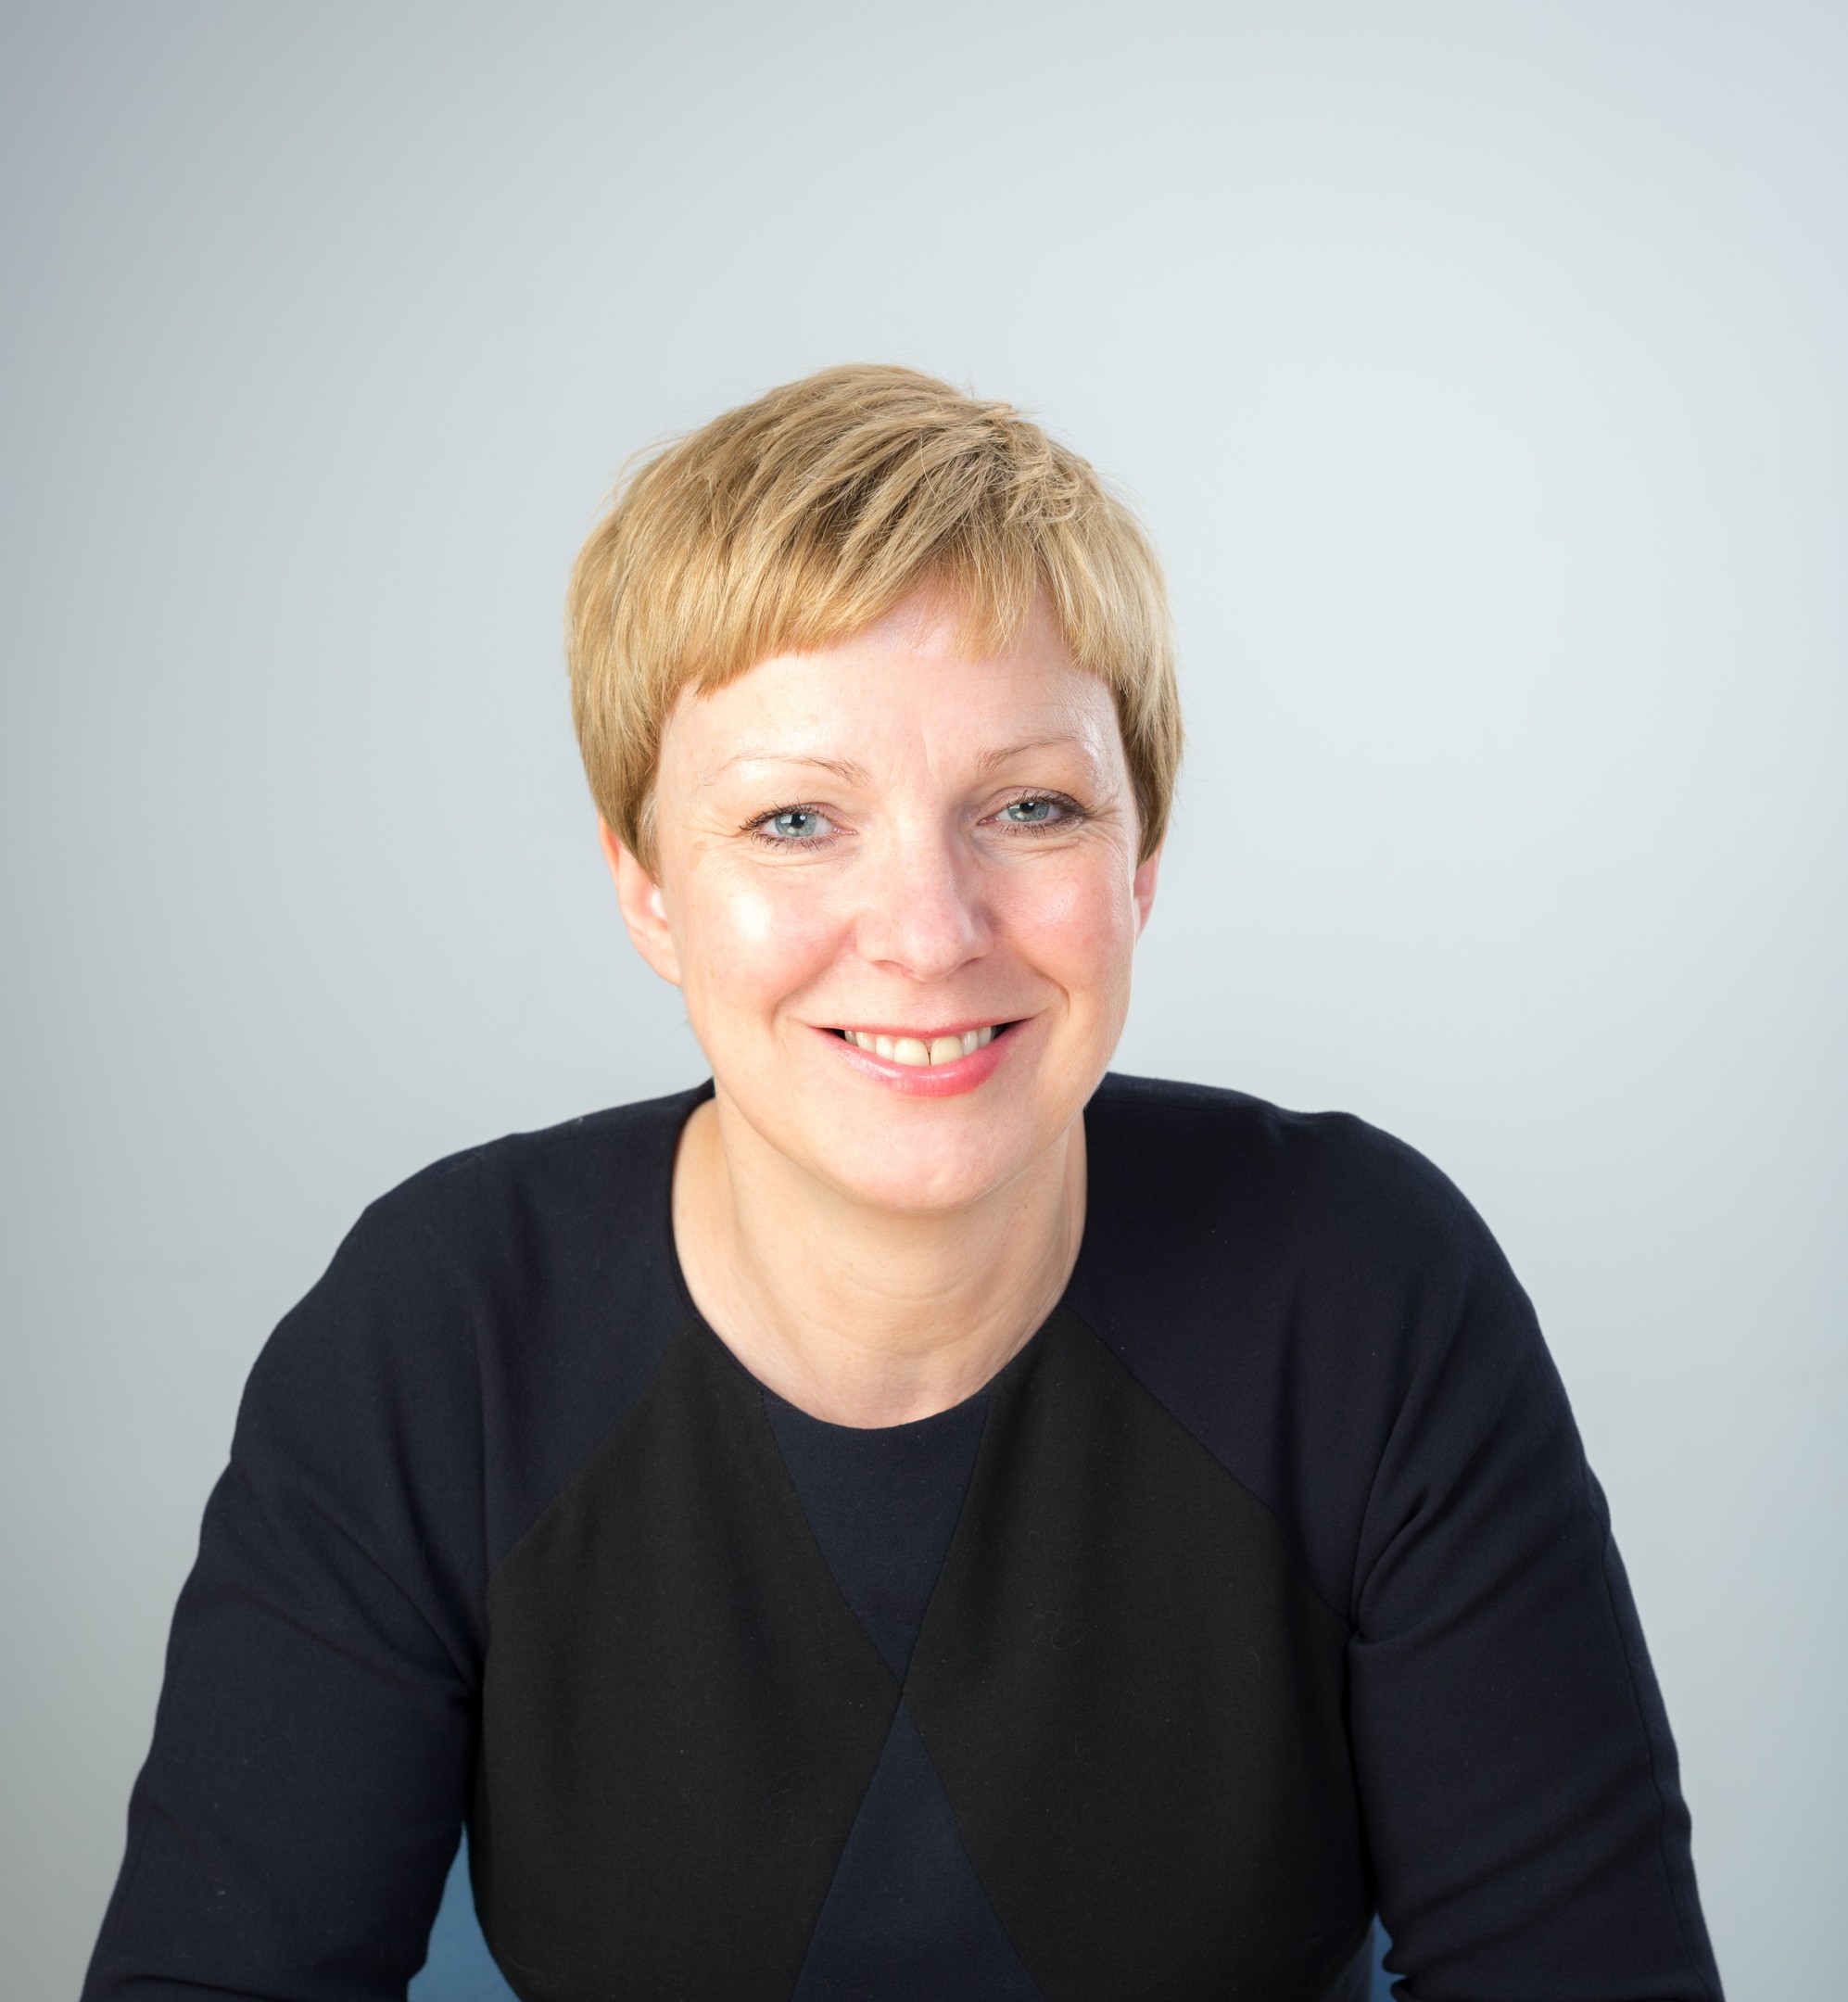 Jennifer Young, Chairman and Partner at Ledingham Chalmers